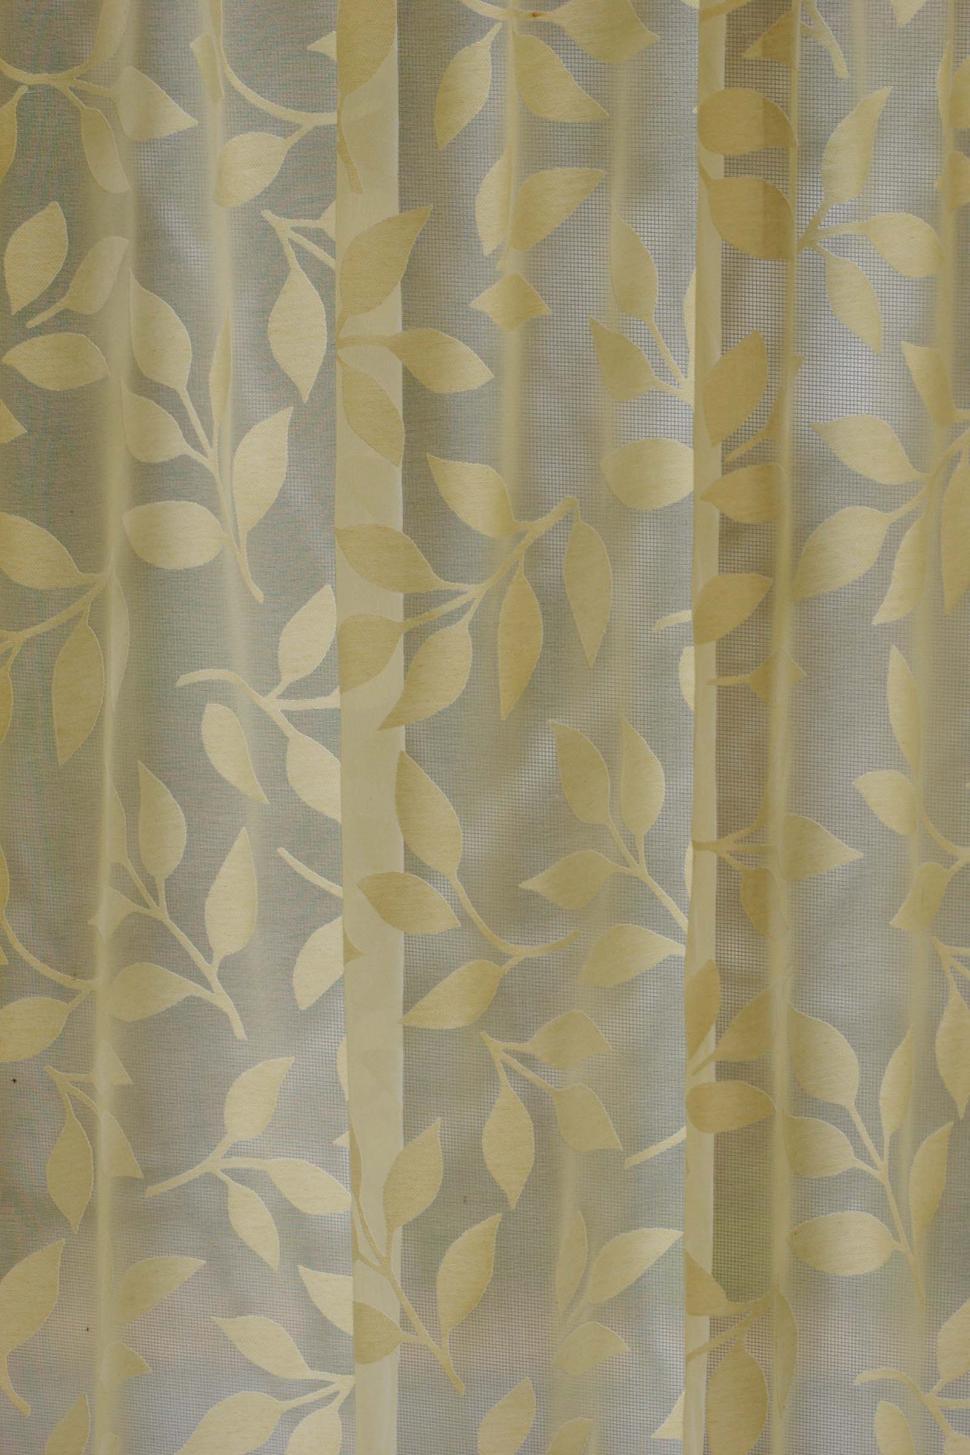 Free Image of Fabric with plant design 